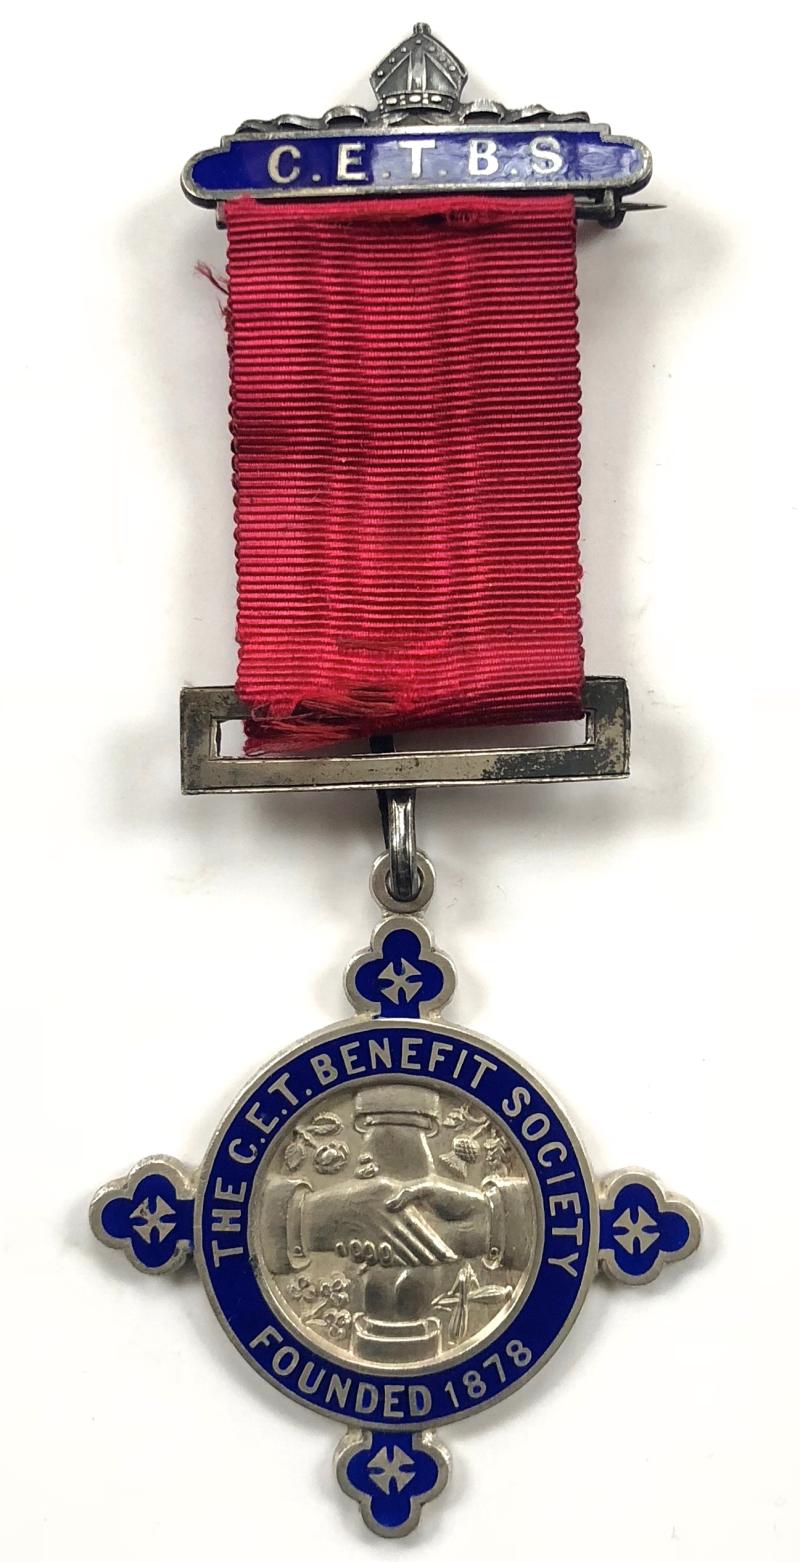 Church of England Temperance Benefit Society 1902 silver medal